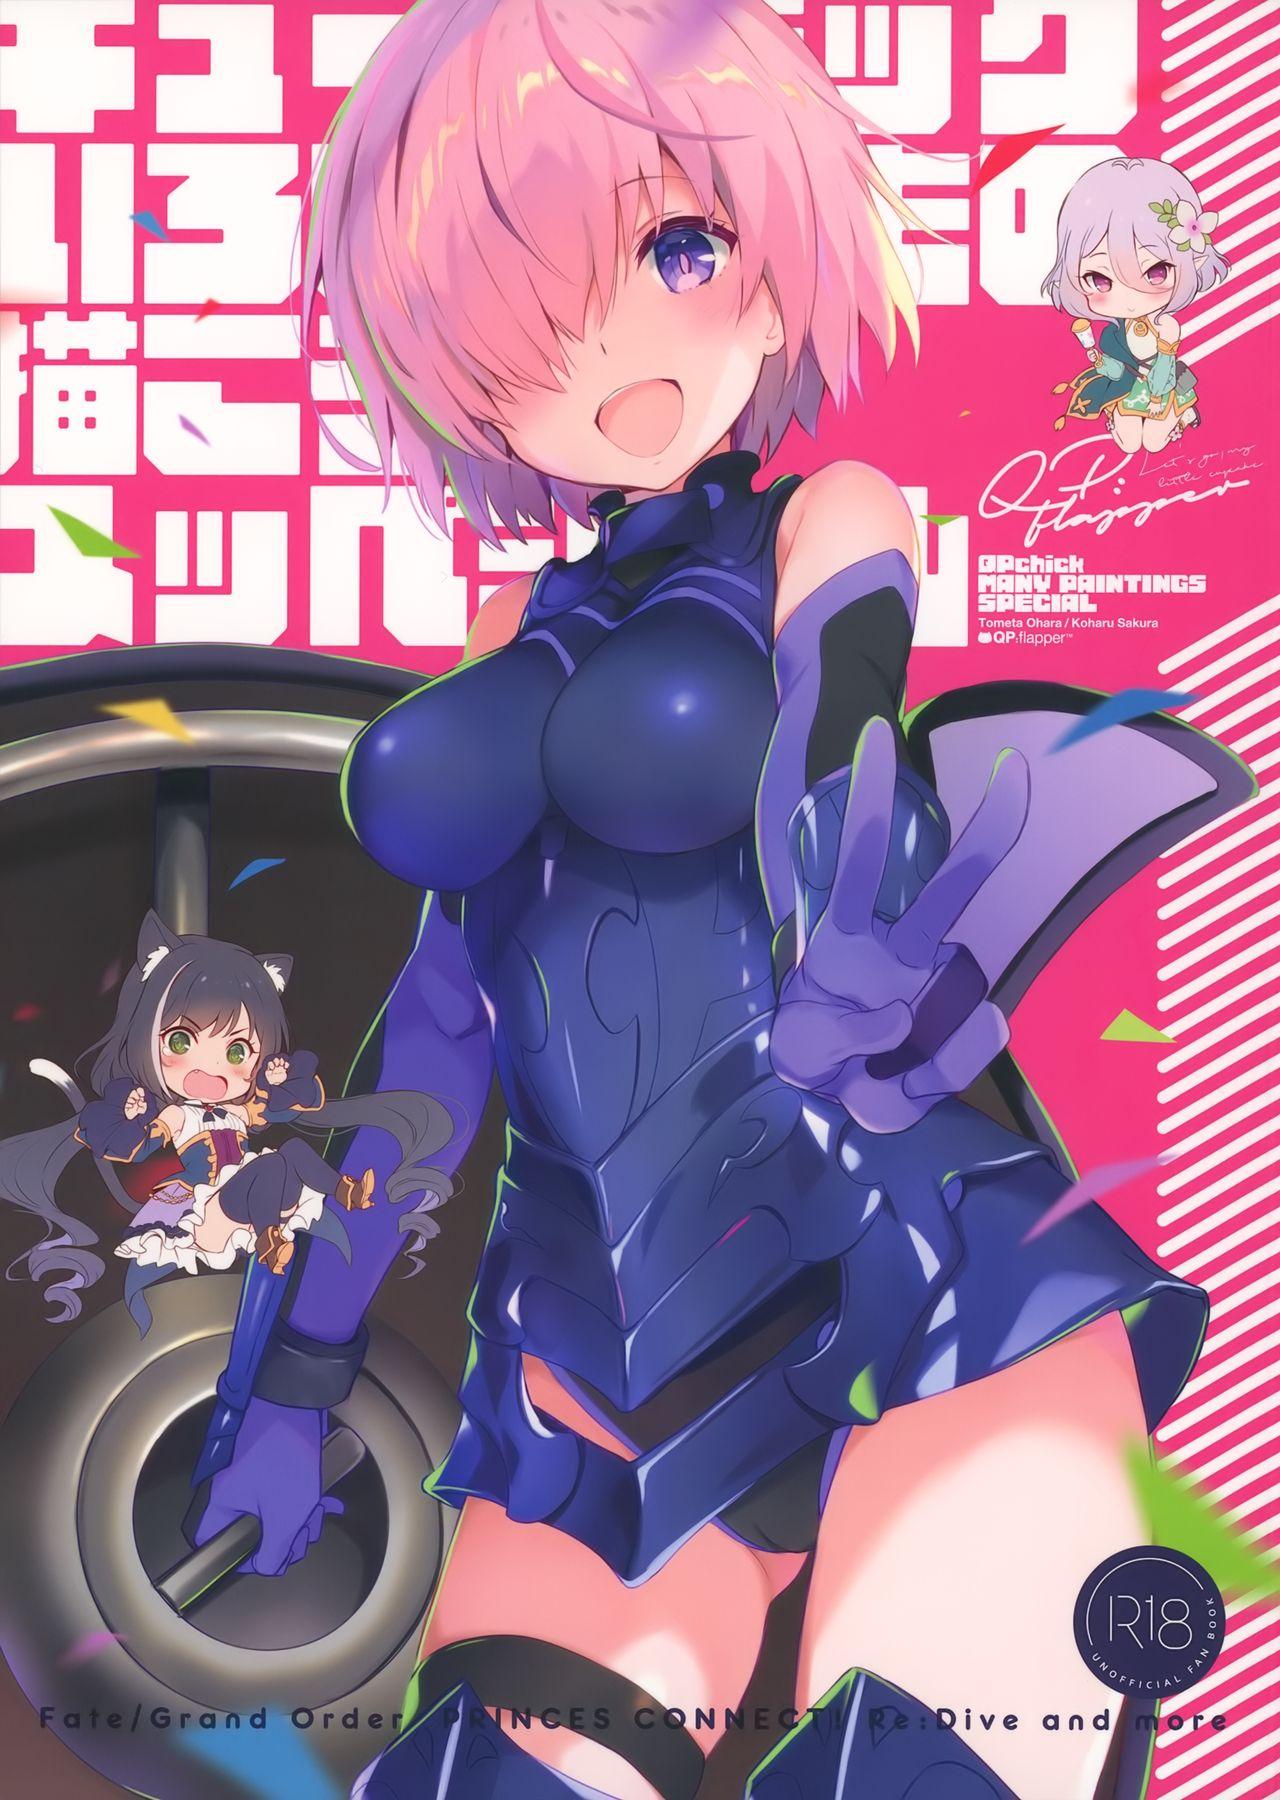 Trannies QPchick Iroiro na Mono Kakou Special - Fate grand order Princess connect Housewife - Page 1